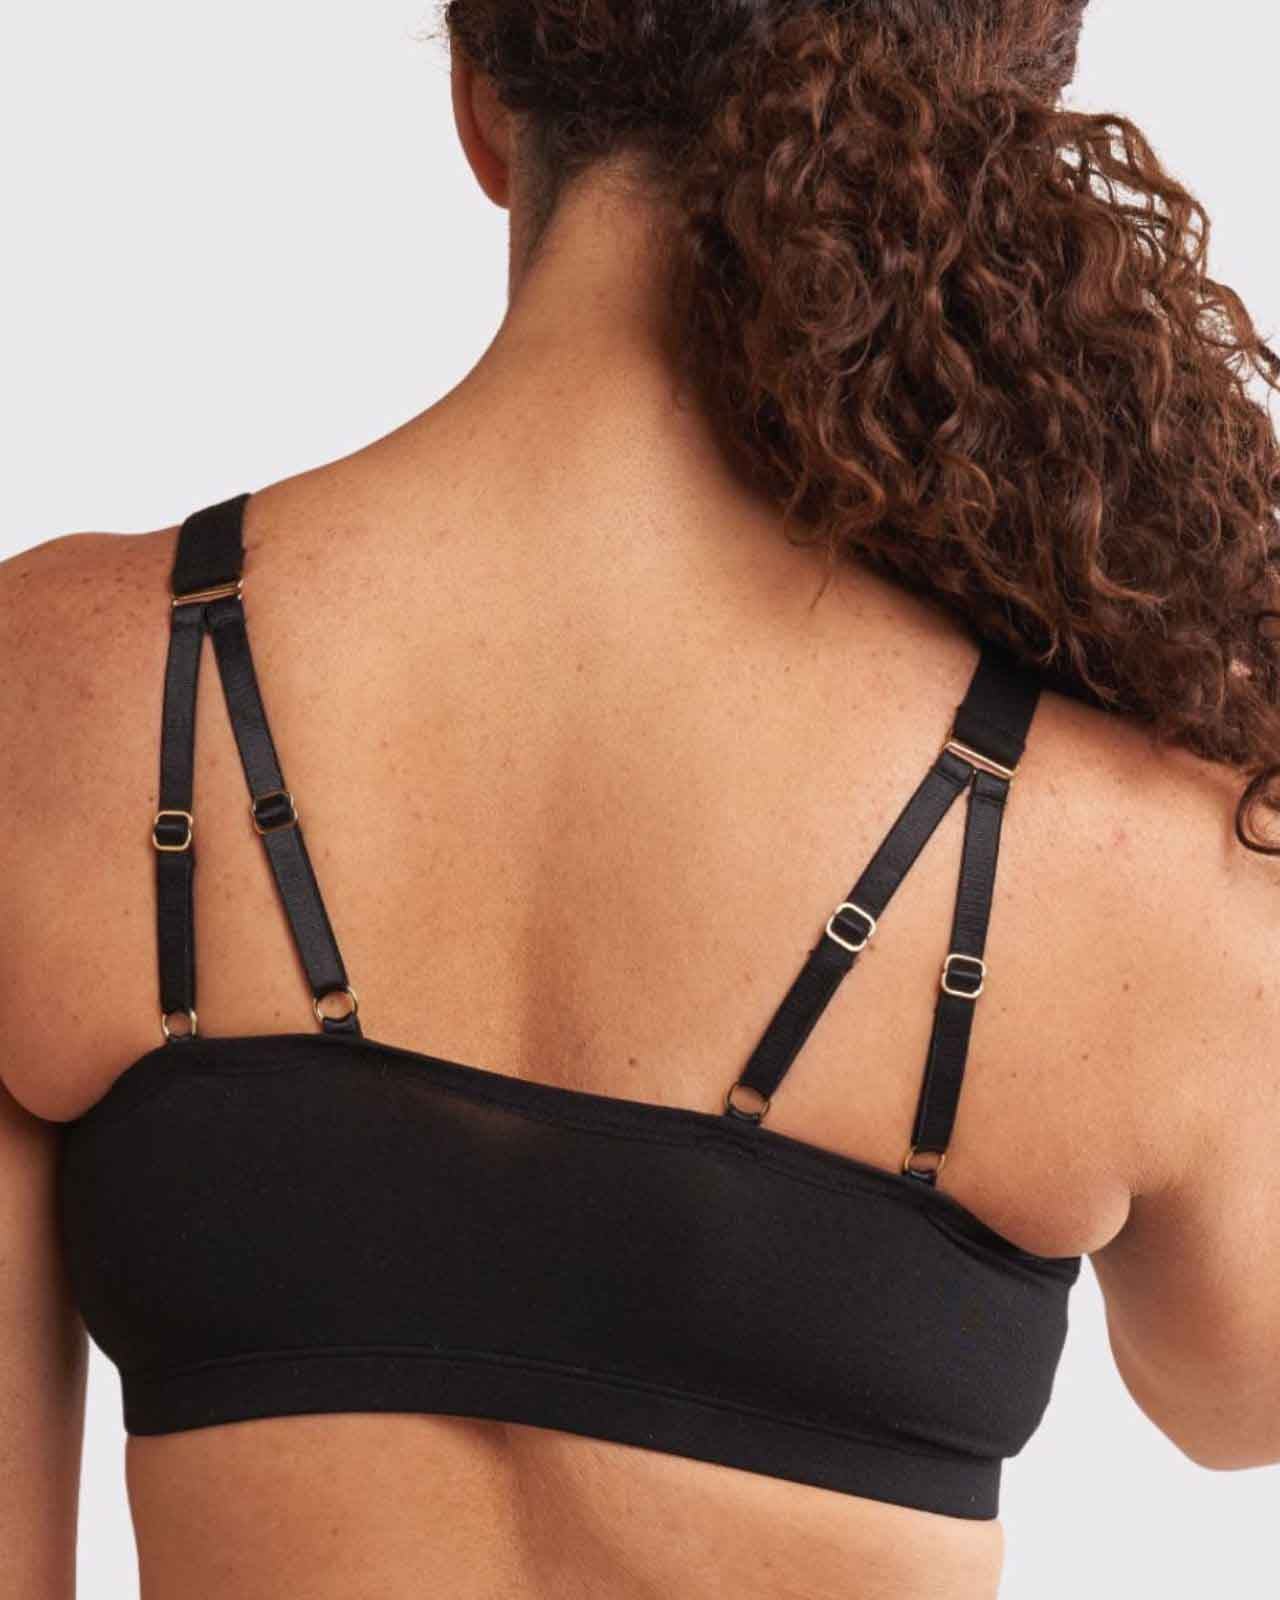 How to make a front closure bralette for larger cups